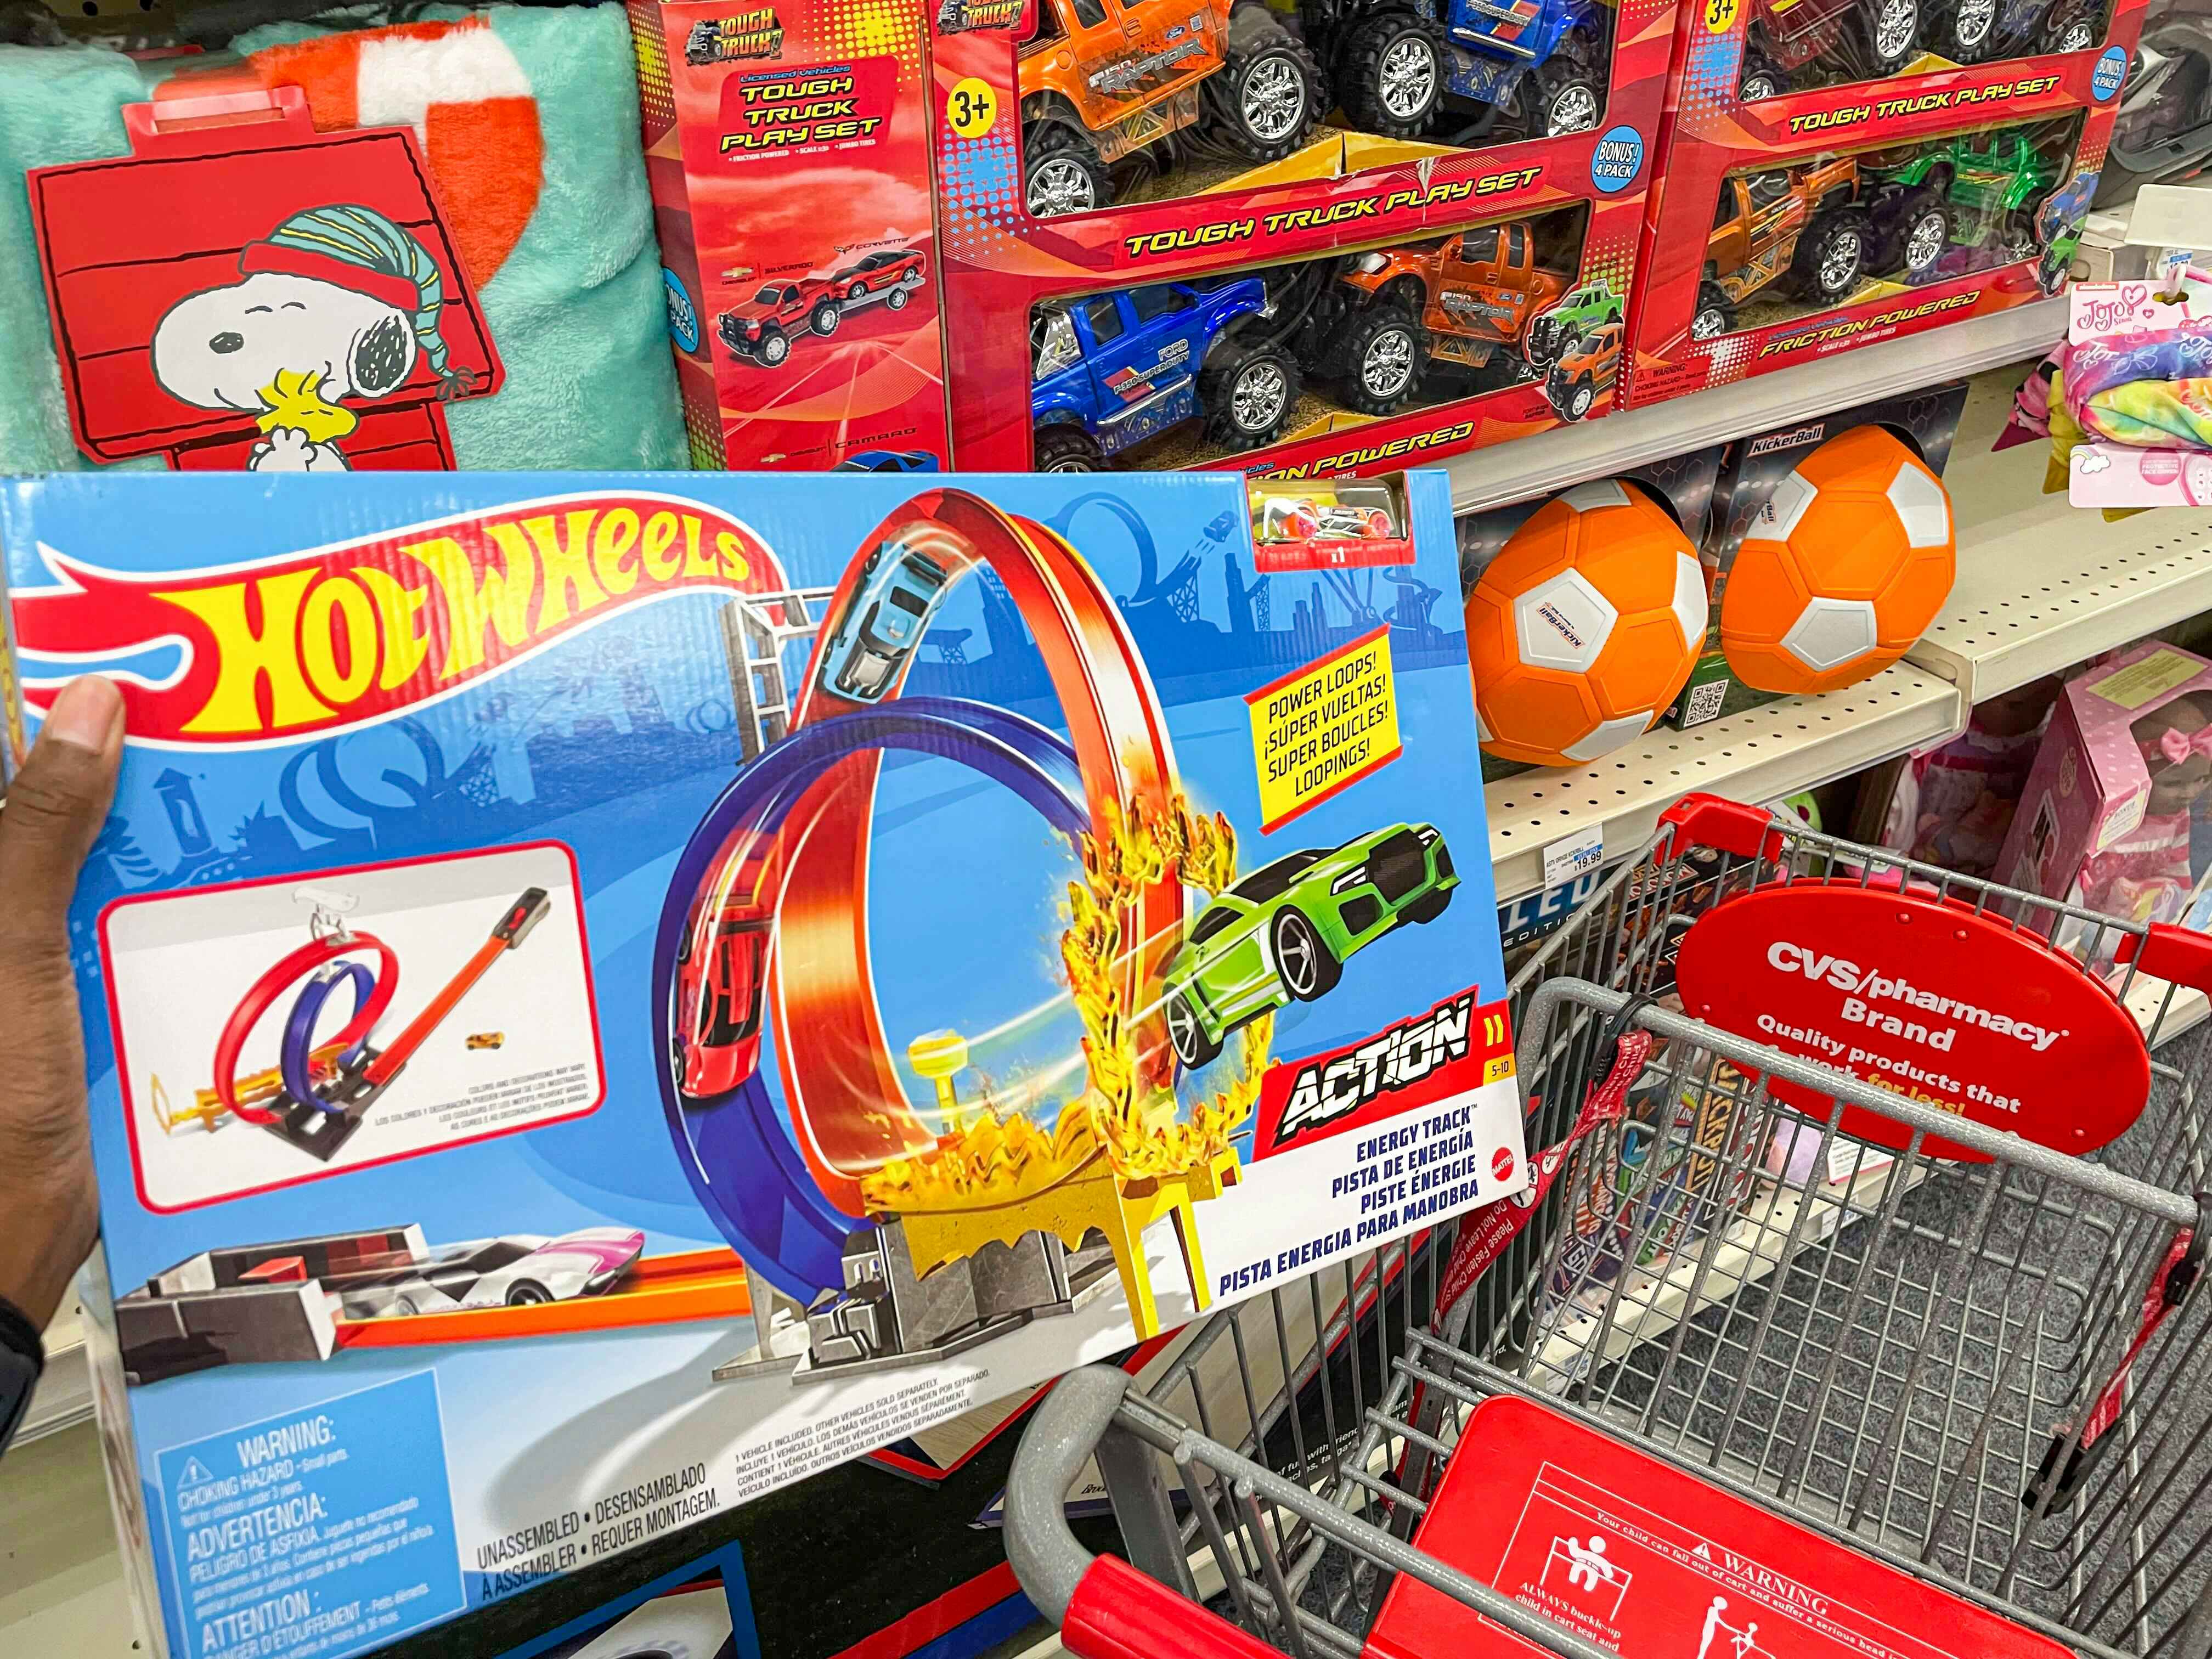 A person putting a Hot Wheels toy into a CVS shopping cart during a Black Friday event.